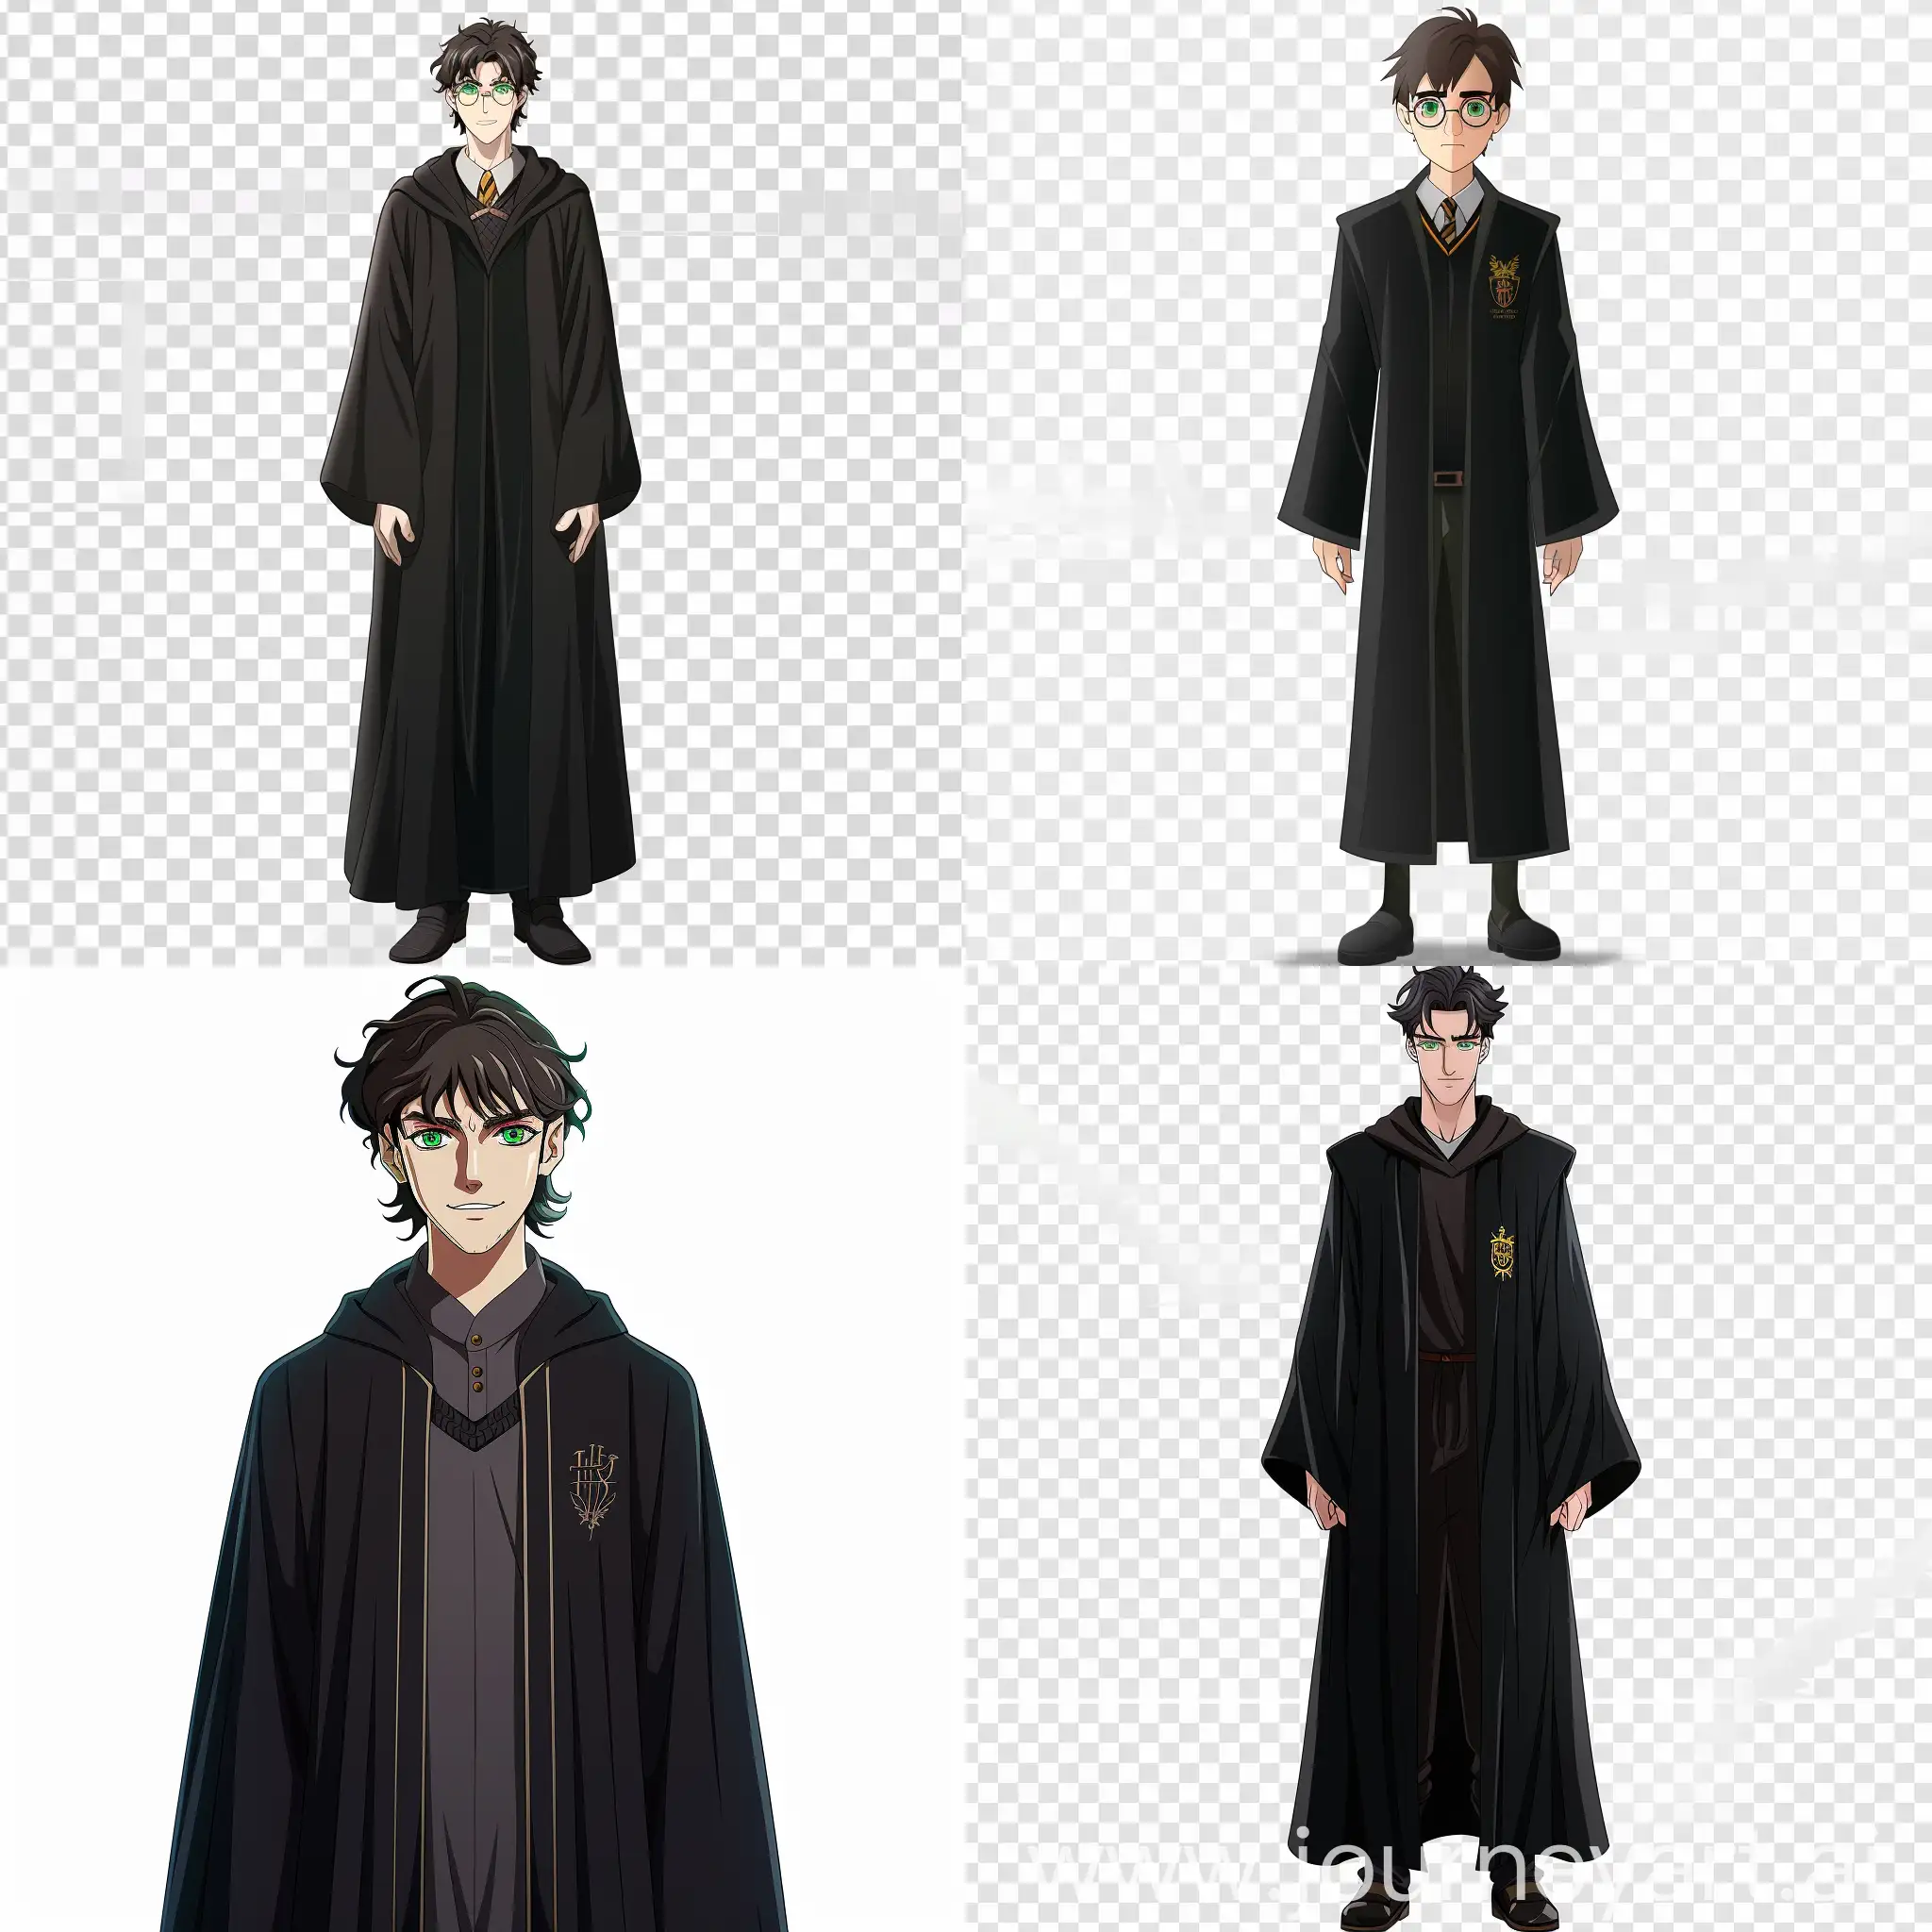 Handsome-Harry-Potter-Character-in-Griffindor-Robe-2D-Anime-Style